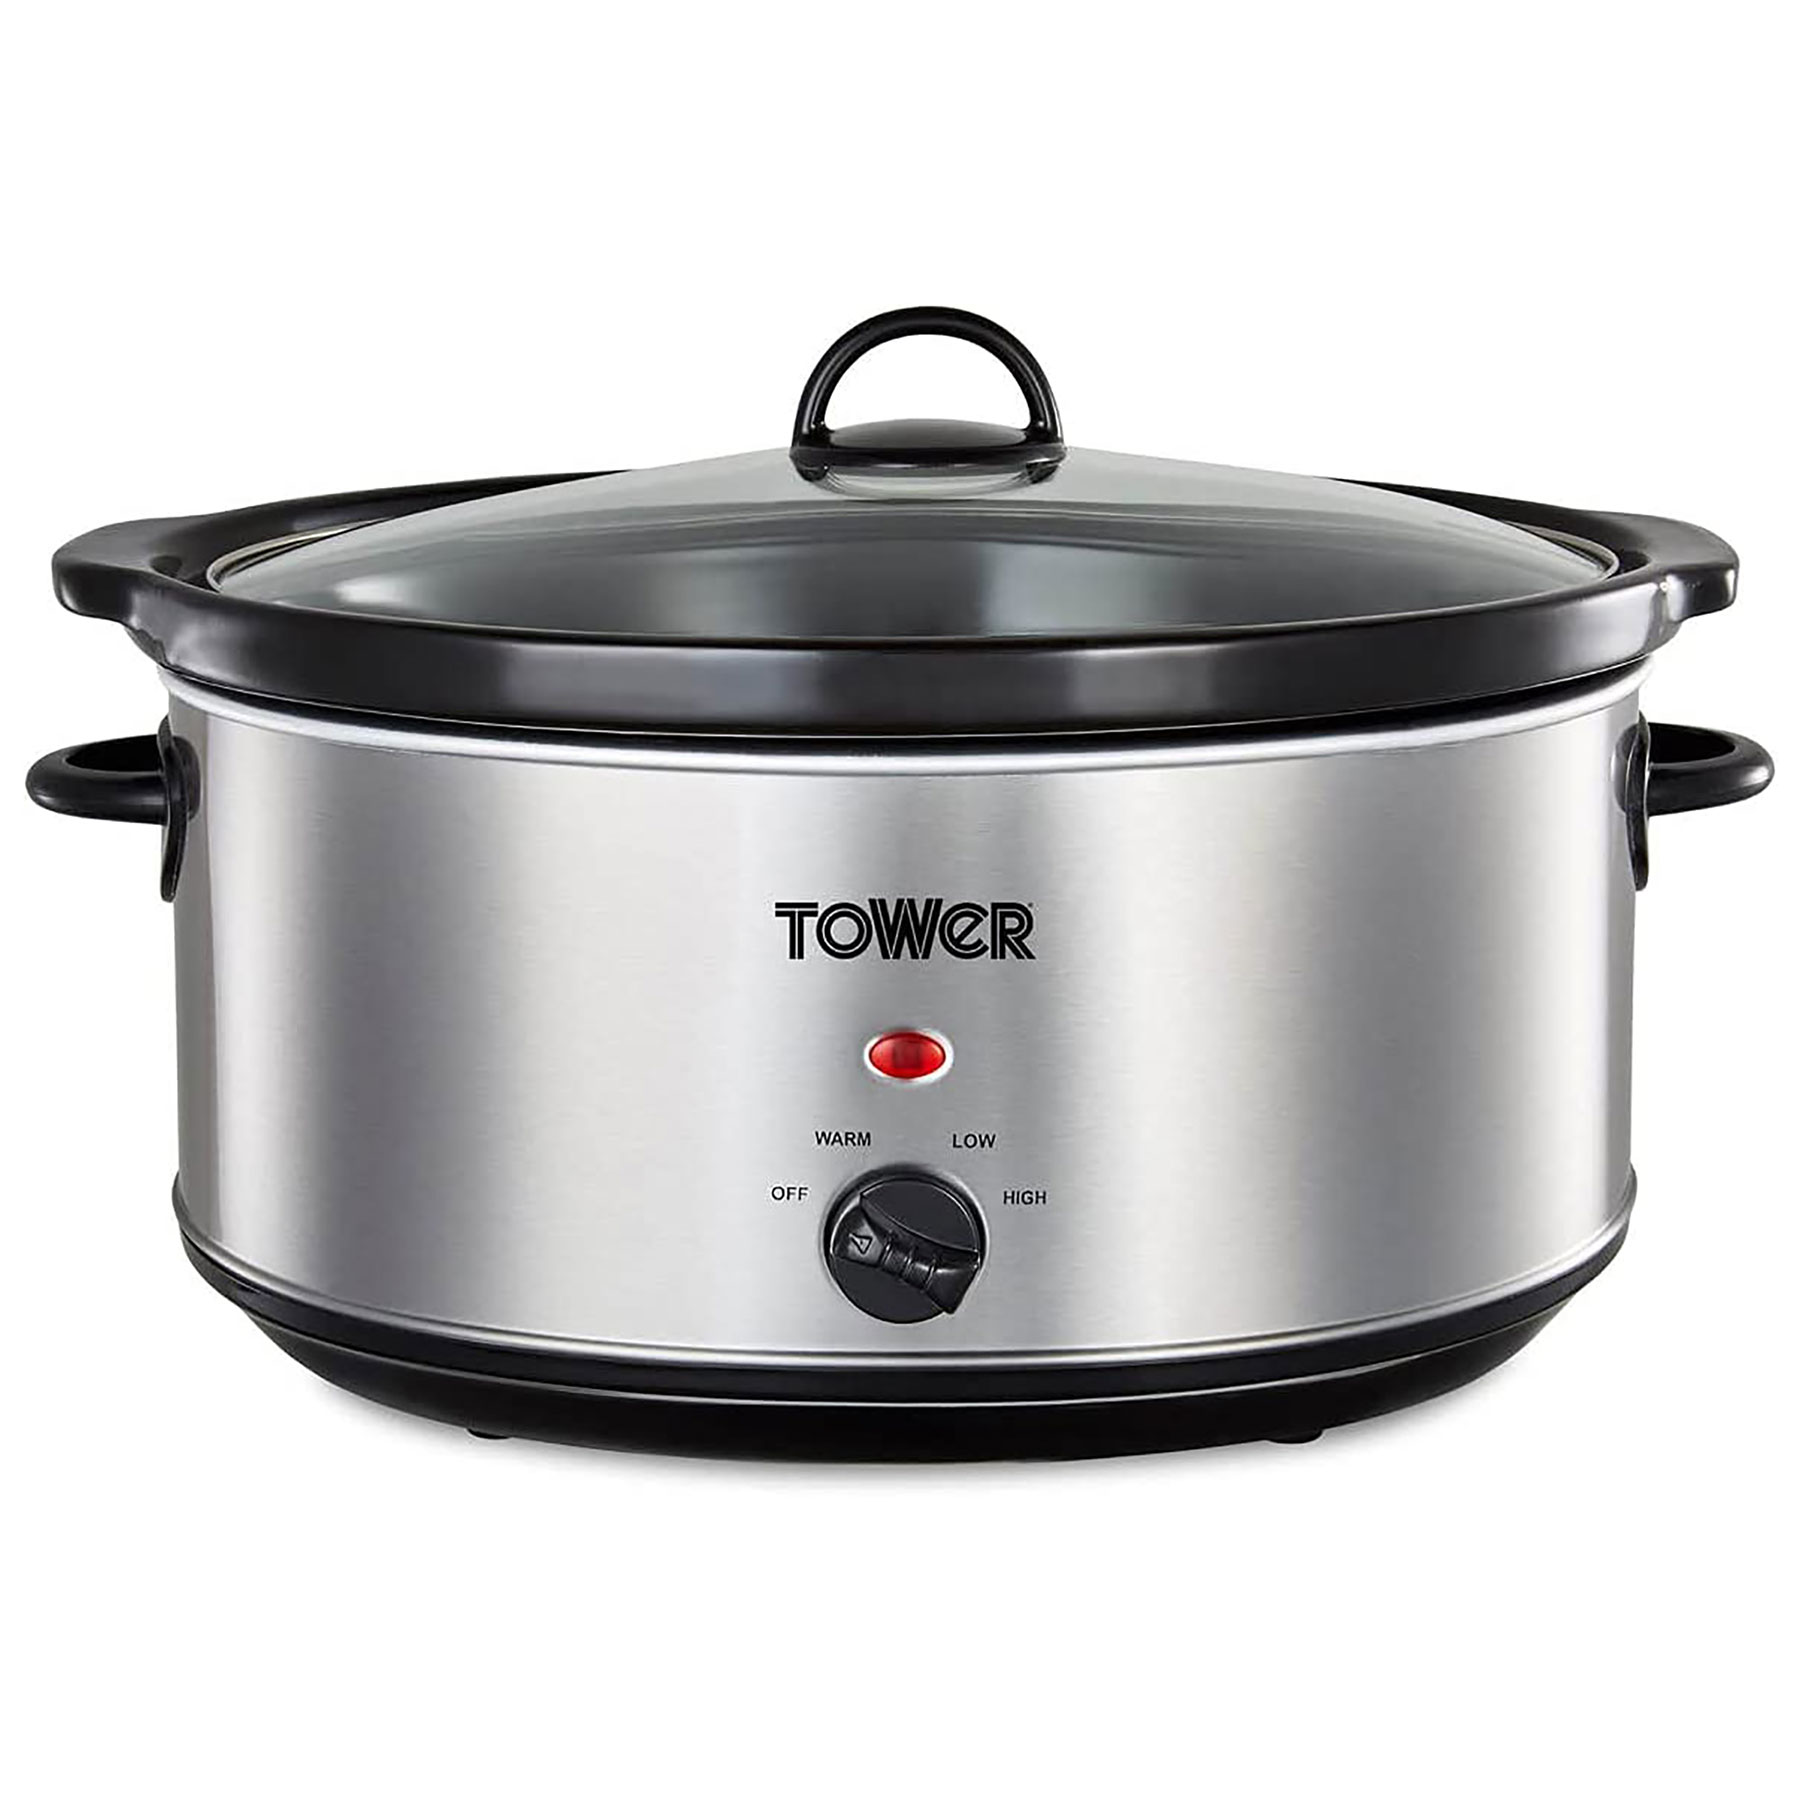 Image of Tower T16040 6 5 Litre Slow Cooker in Stainless Steel